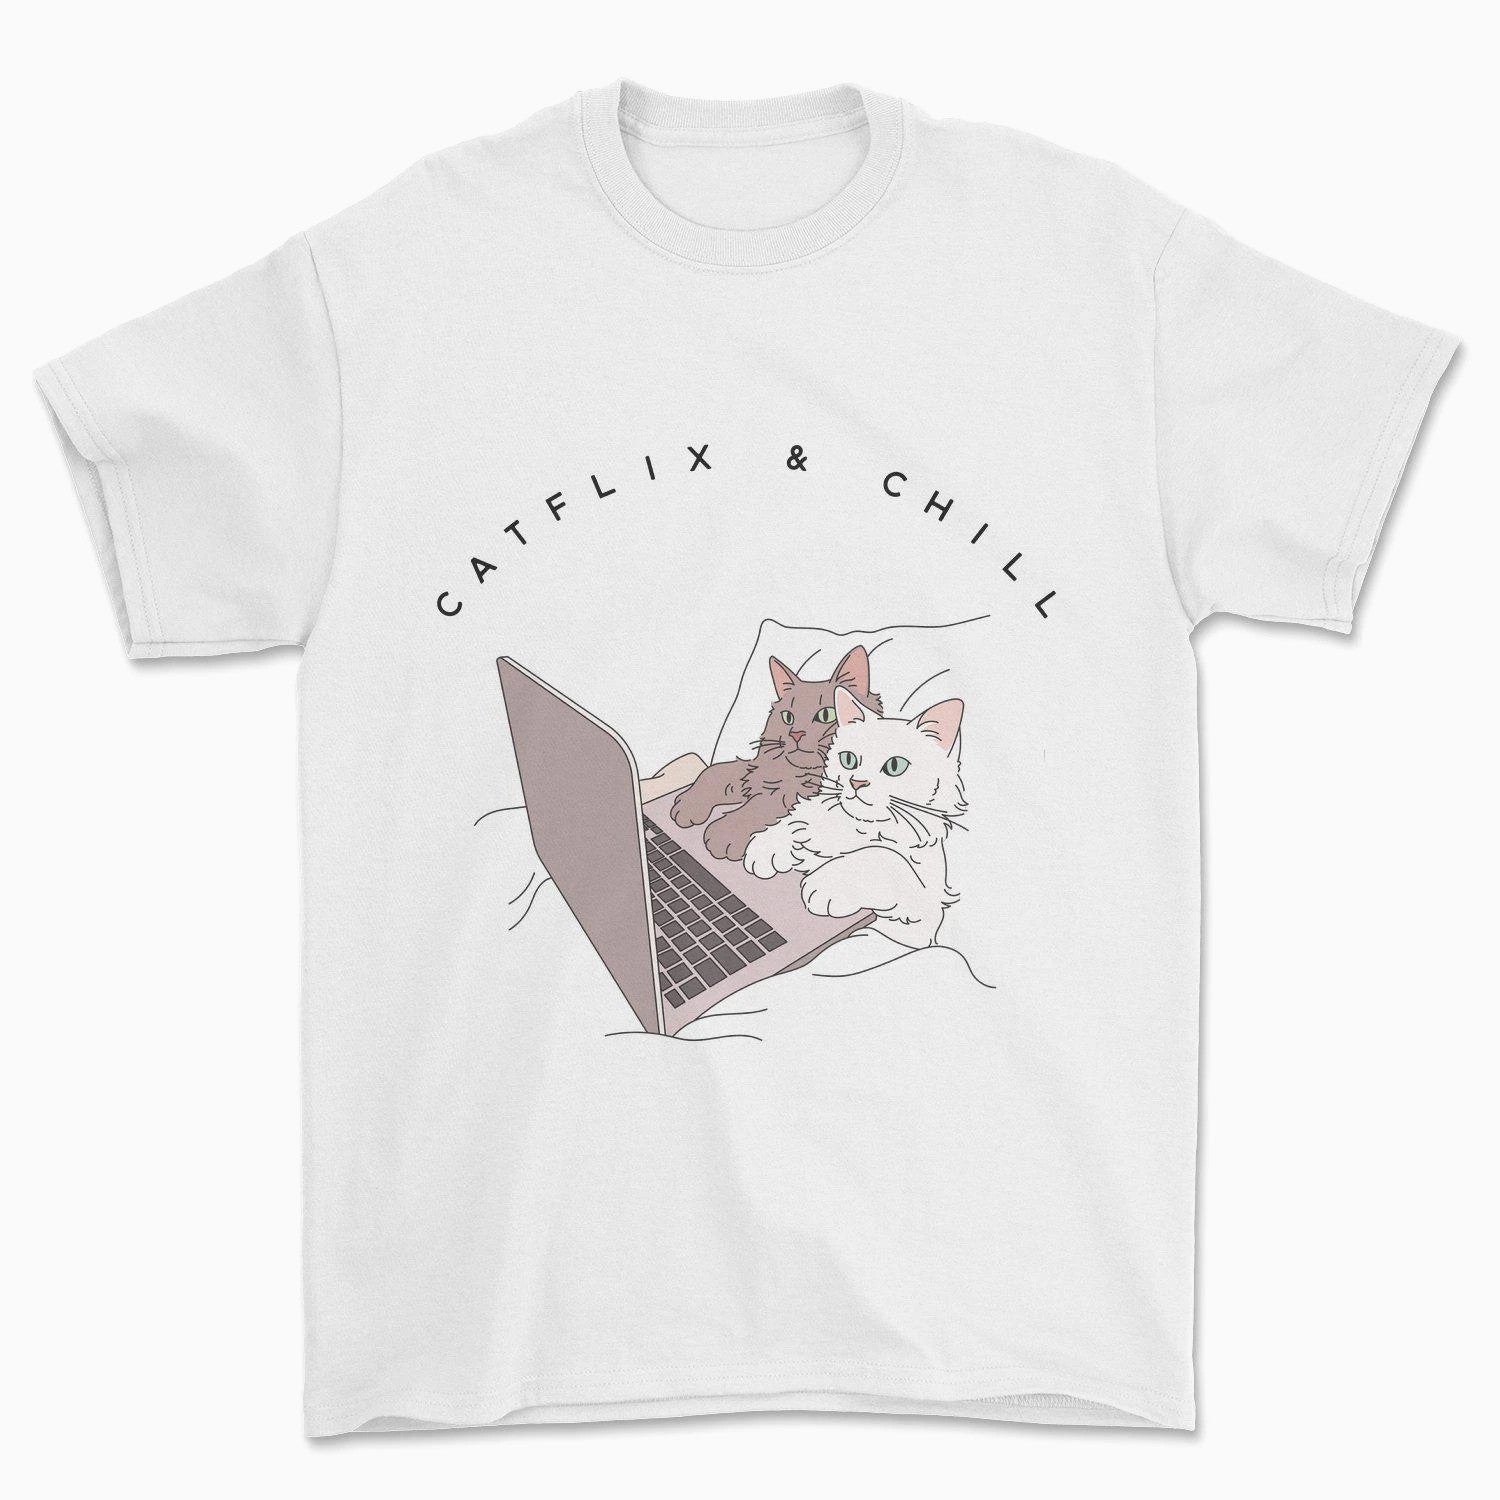 Catflix & Chill T-Shirt - Pawsome Couture